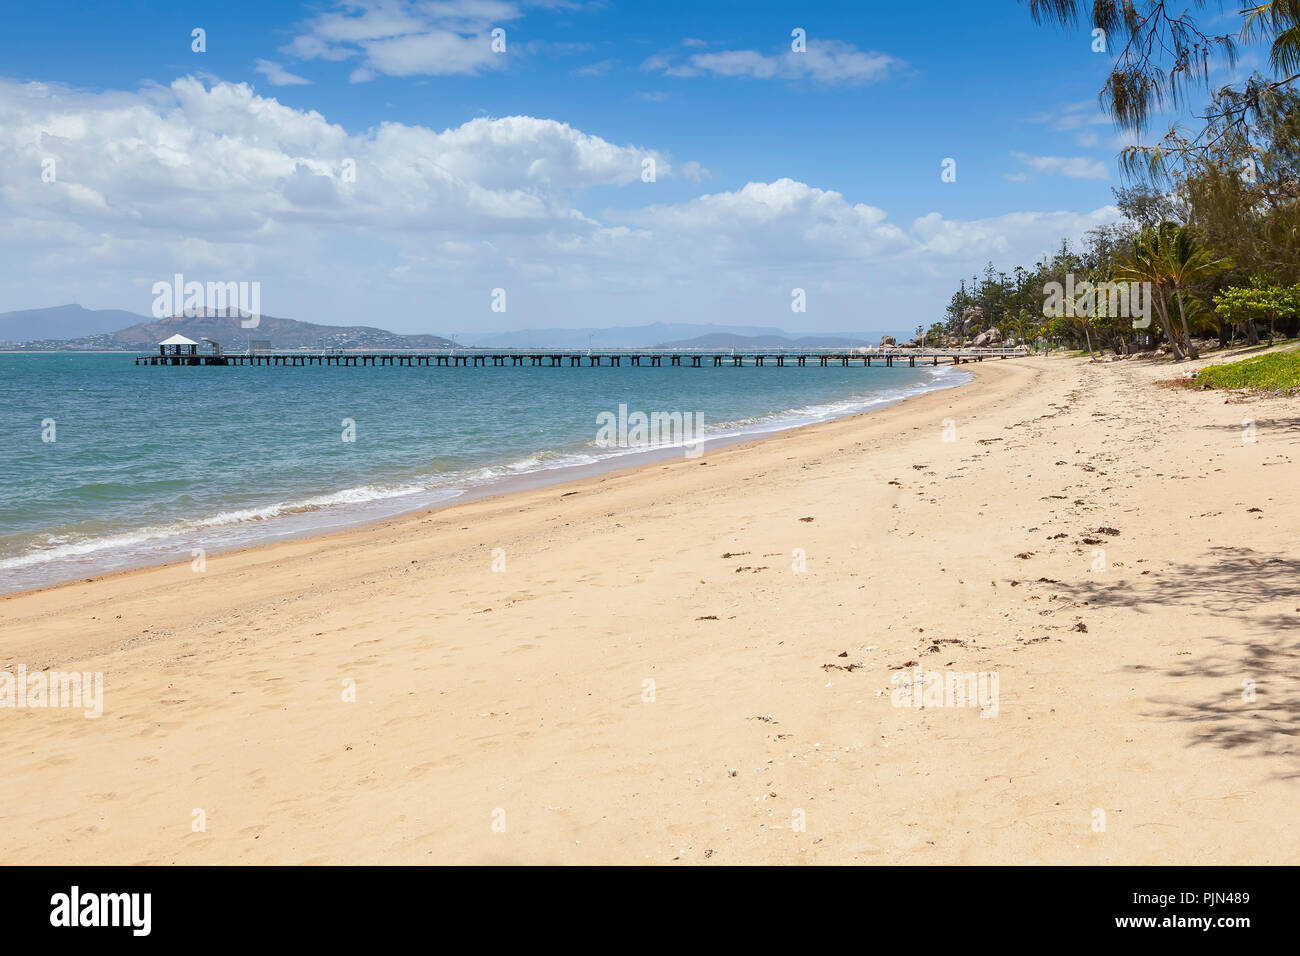 The nice beach of Magnetic Iceland in Australia, Der schoene Strand von Magnetic Island in Australien Stock Photo